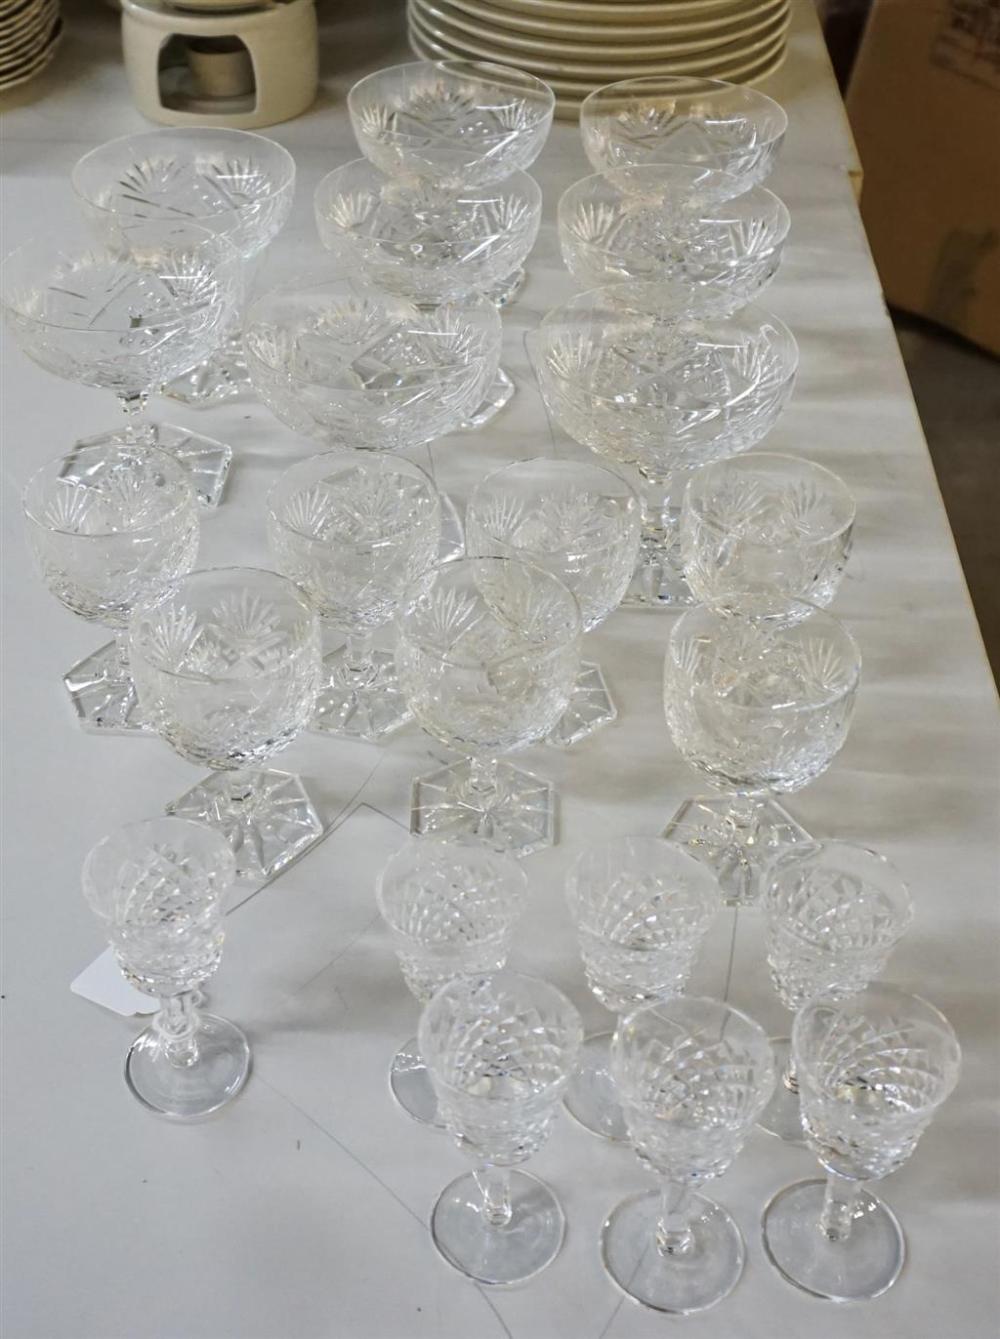 COLLECTION OF CUT GLASS STEMWARE